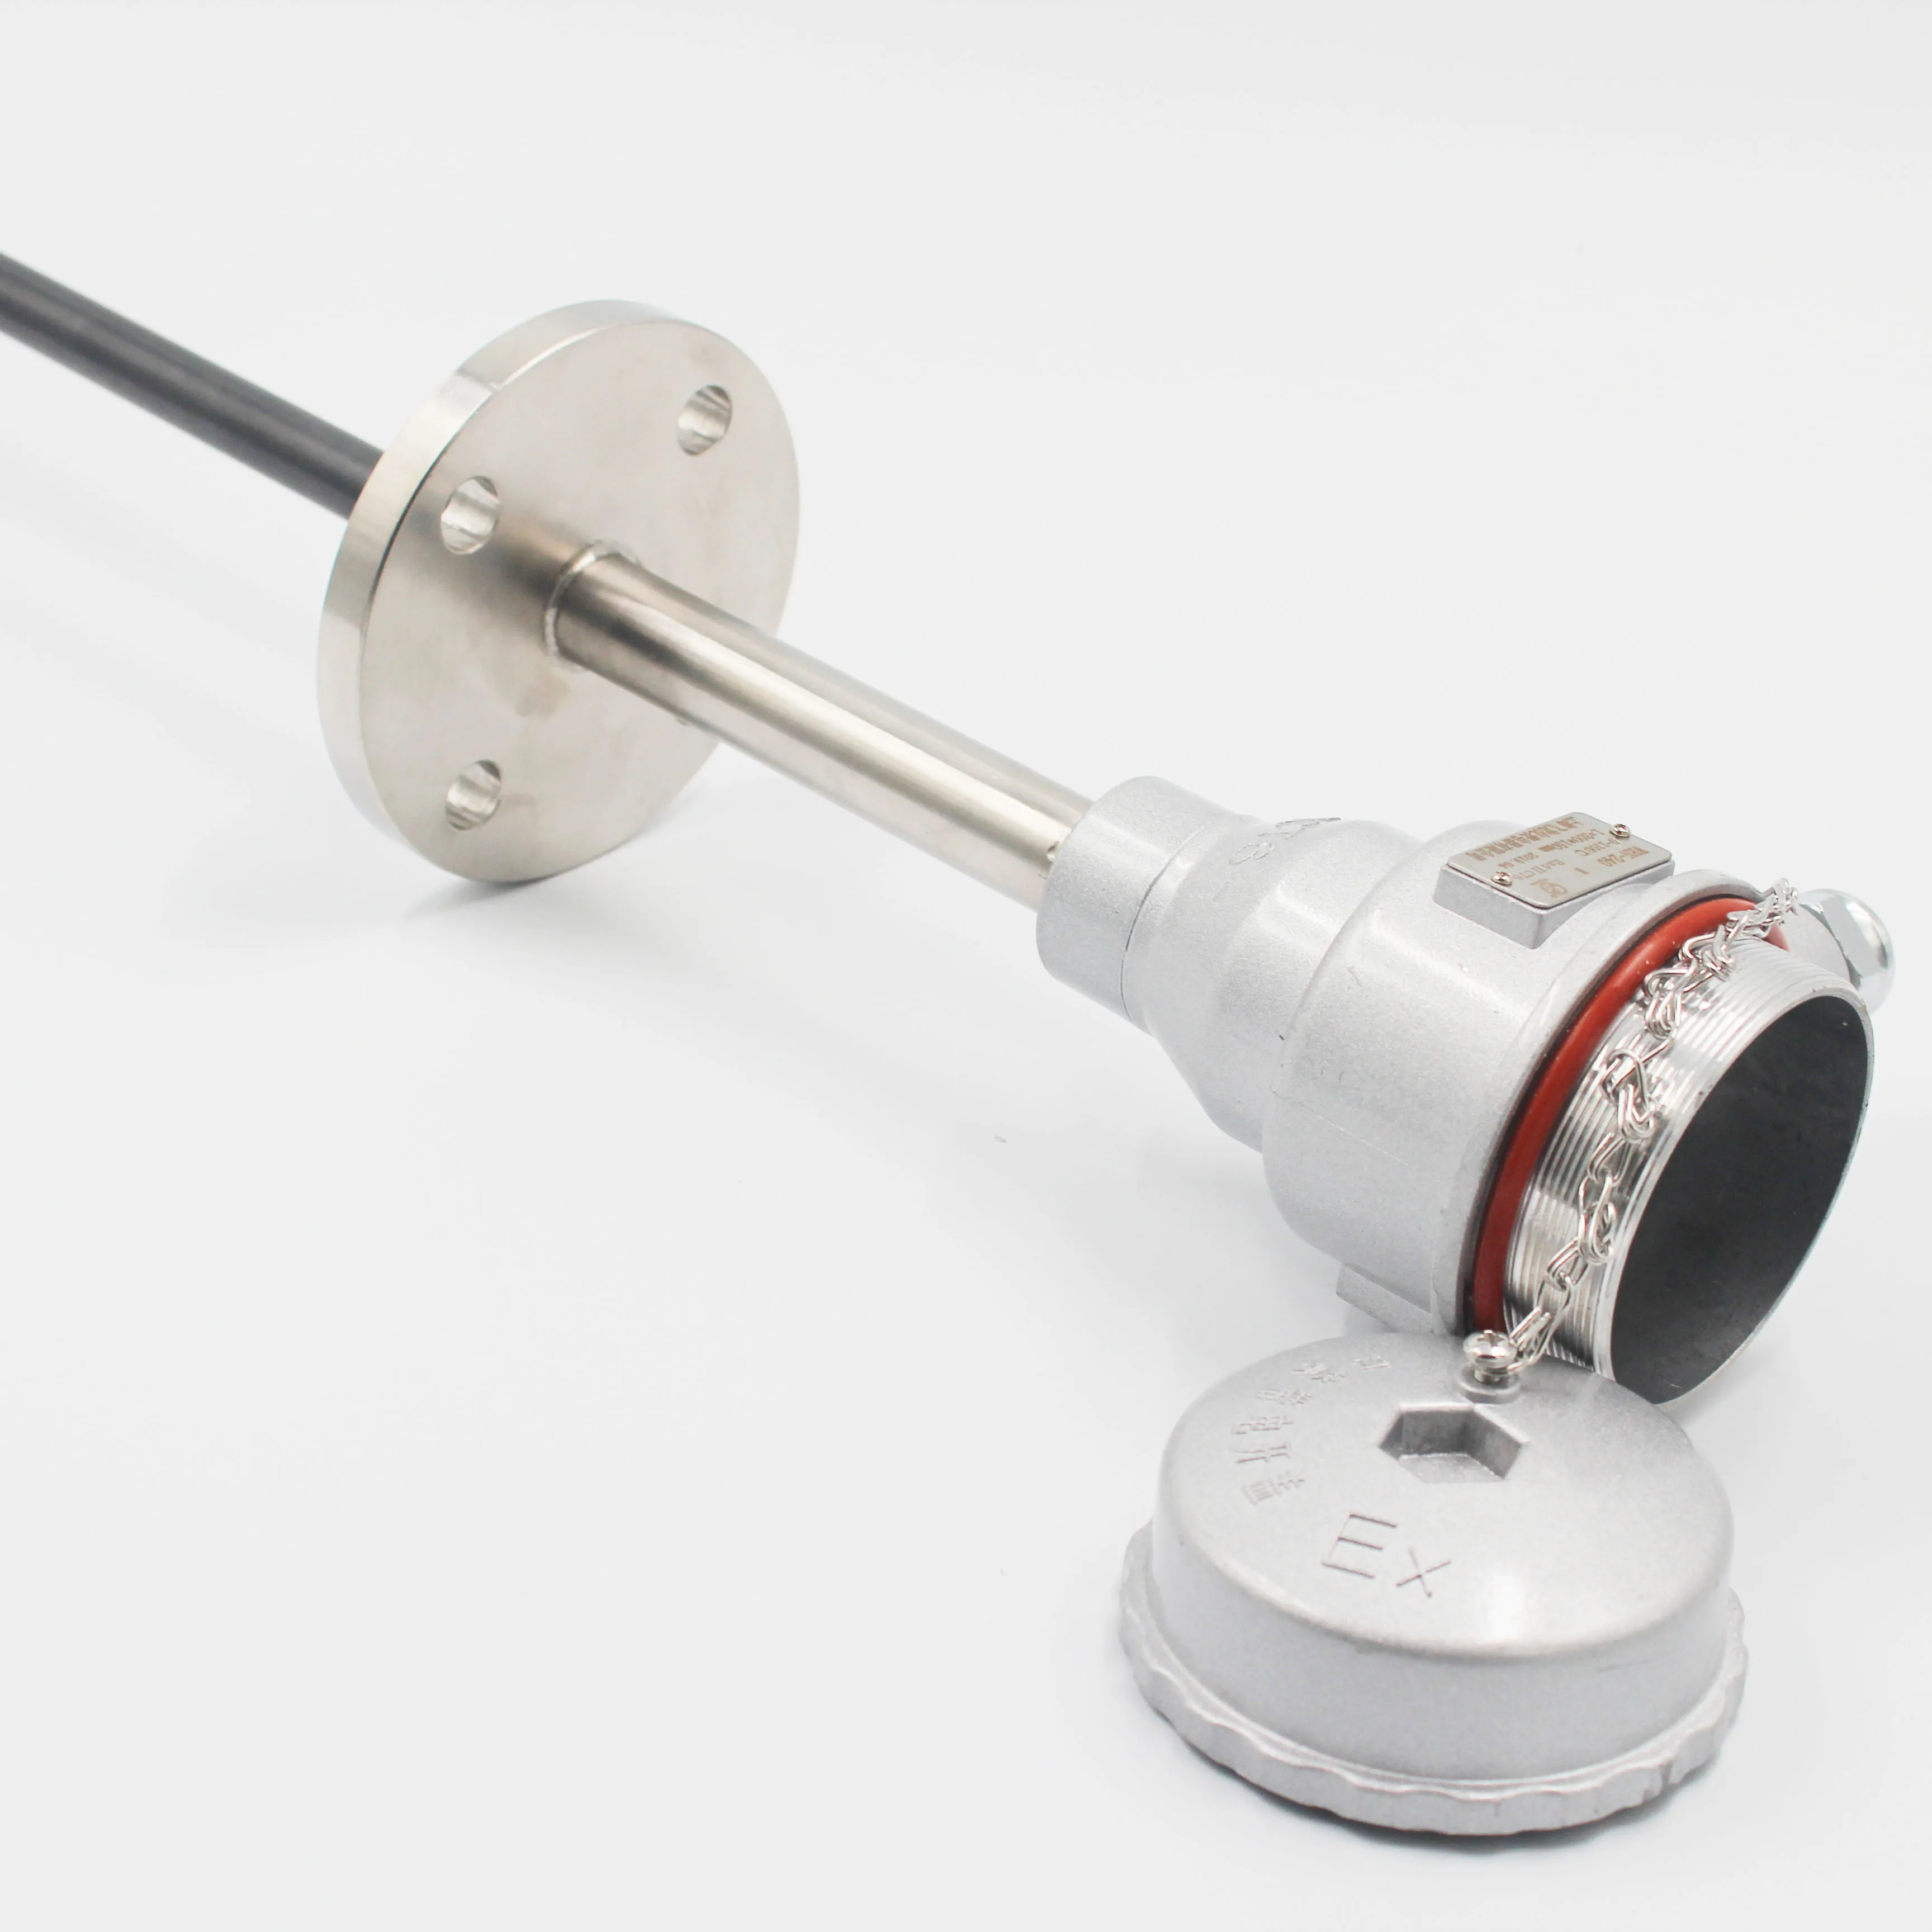 Fixed flange type explosion-proof thermocouple WRN-440